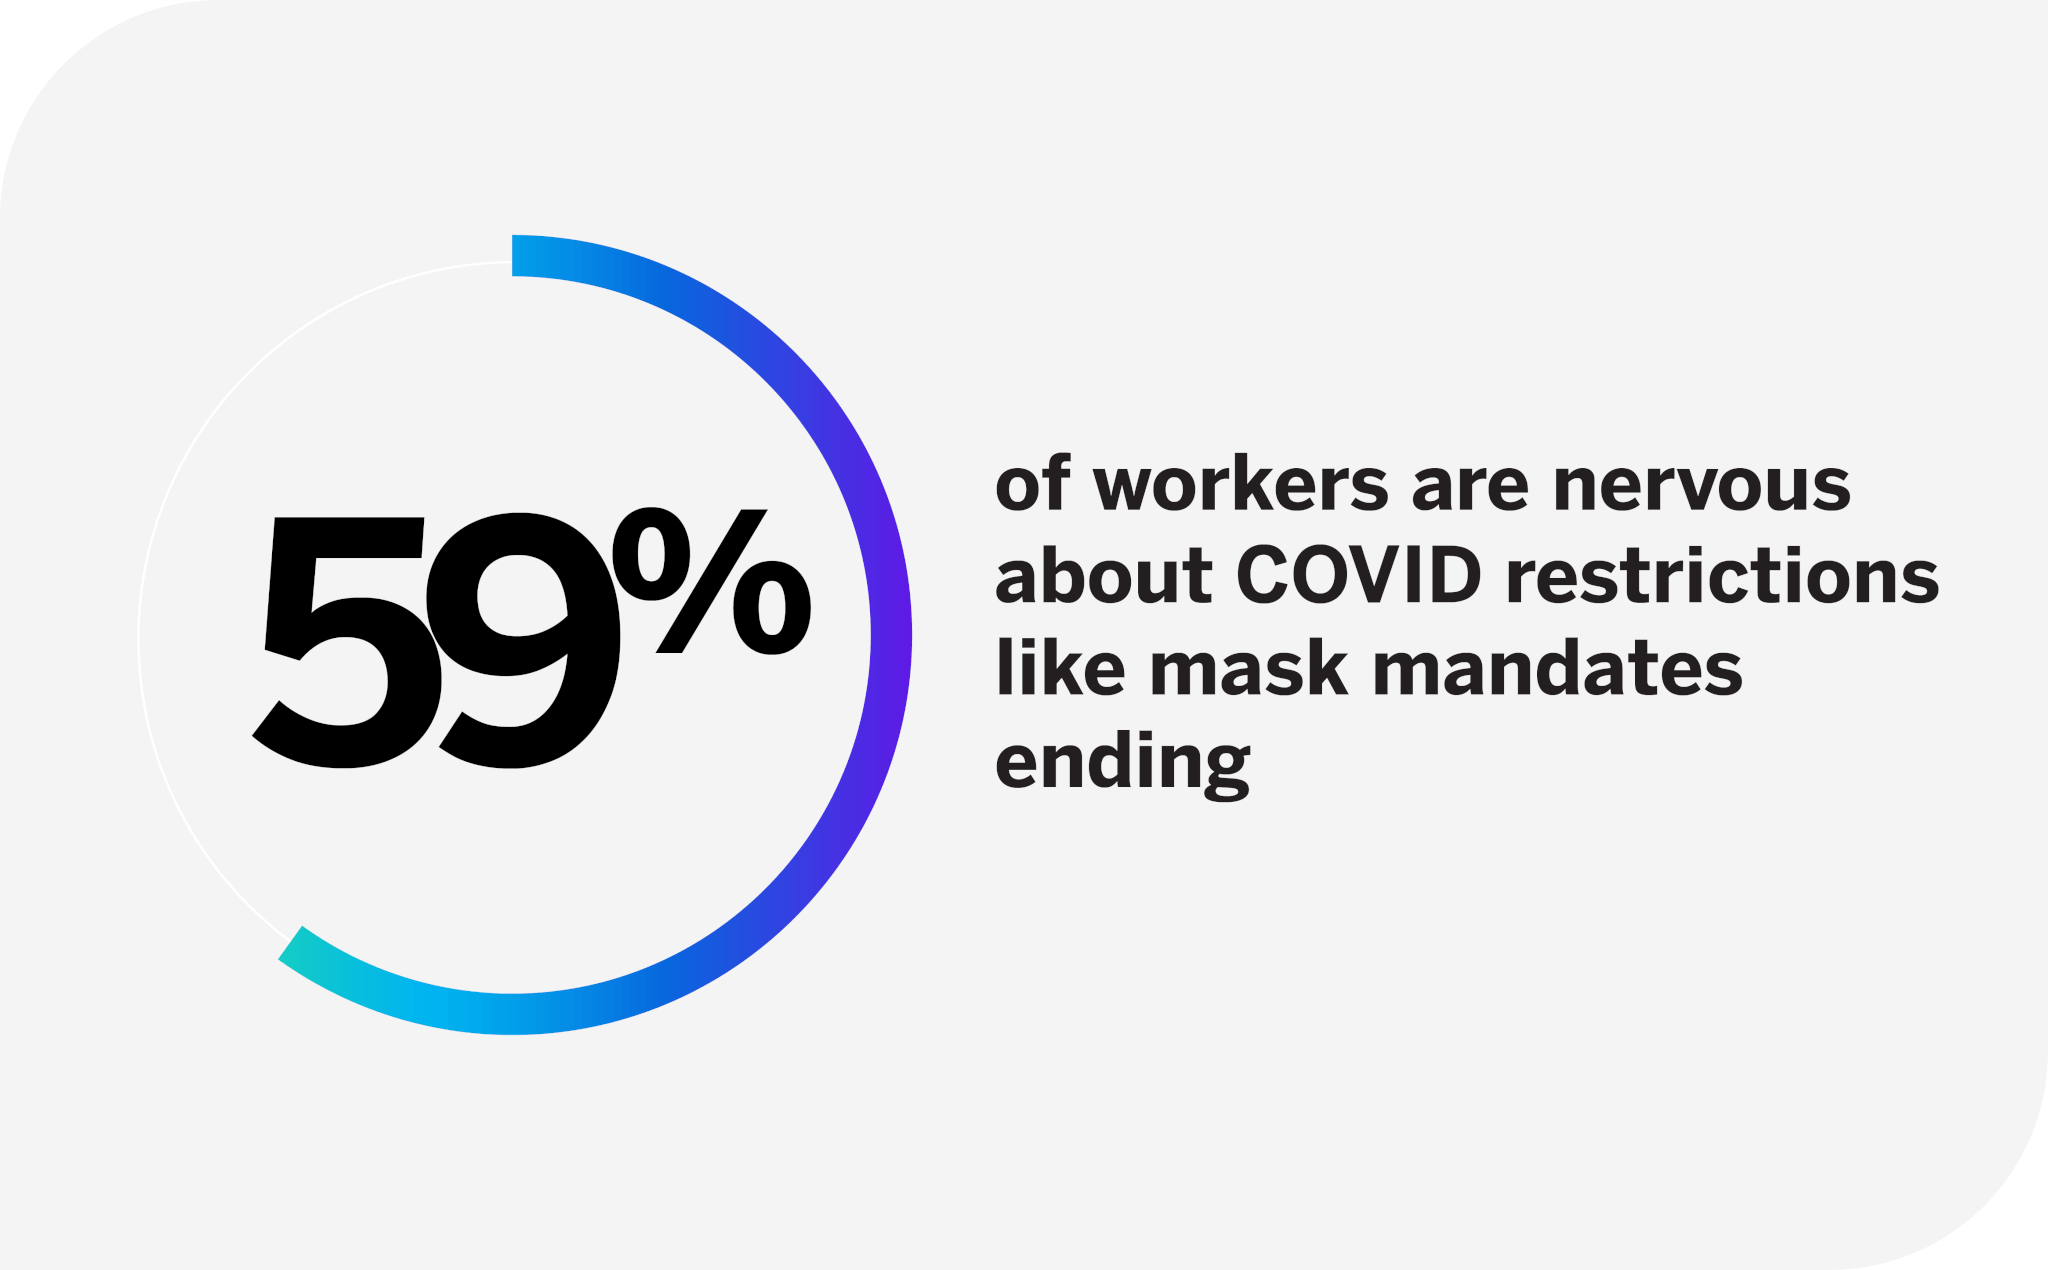 Statistic about employees and mask mandates